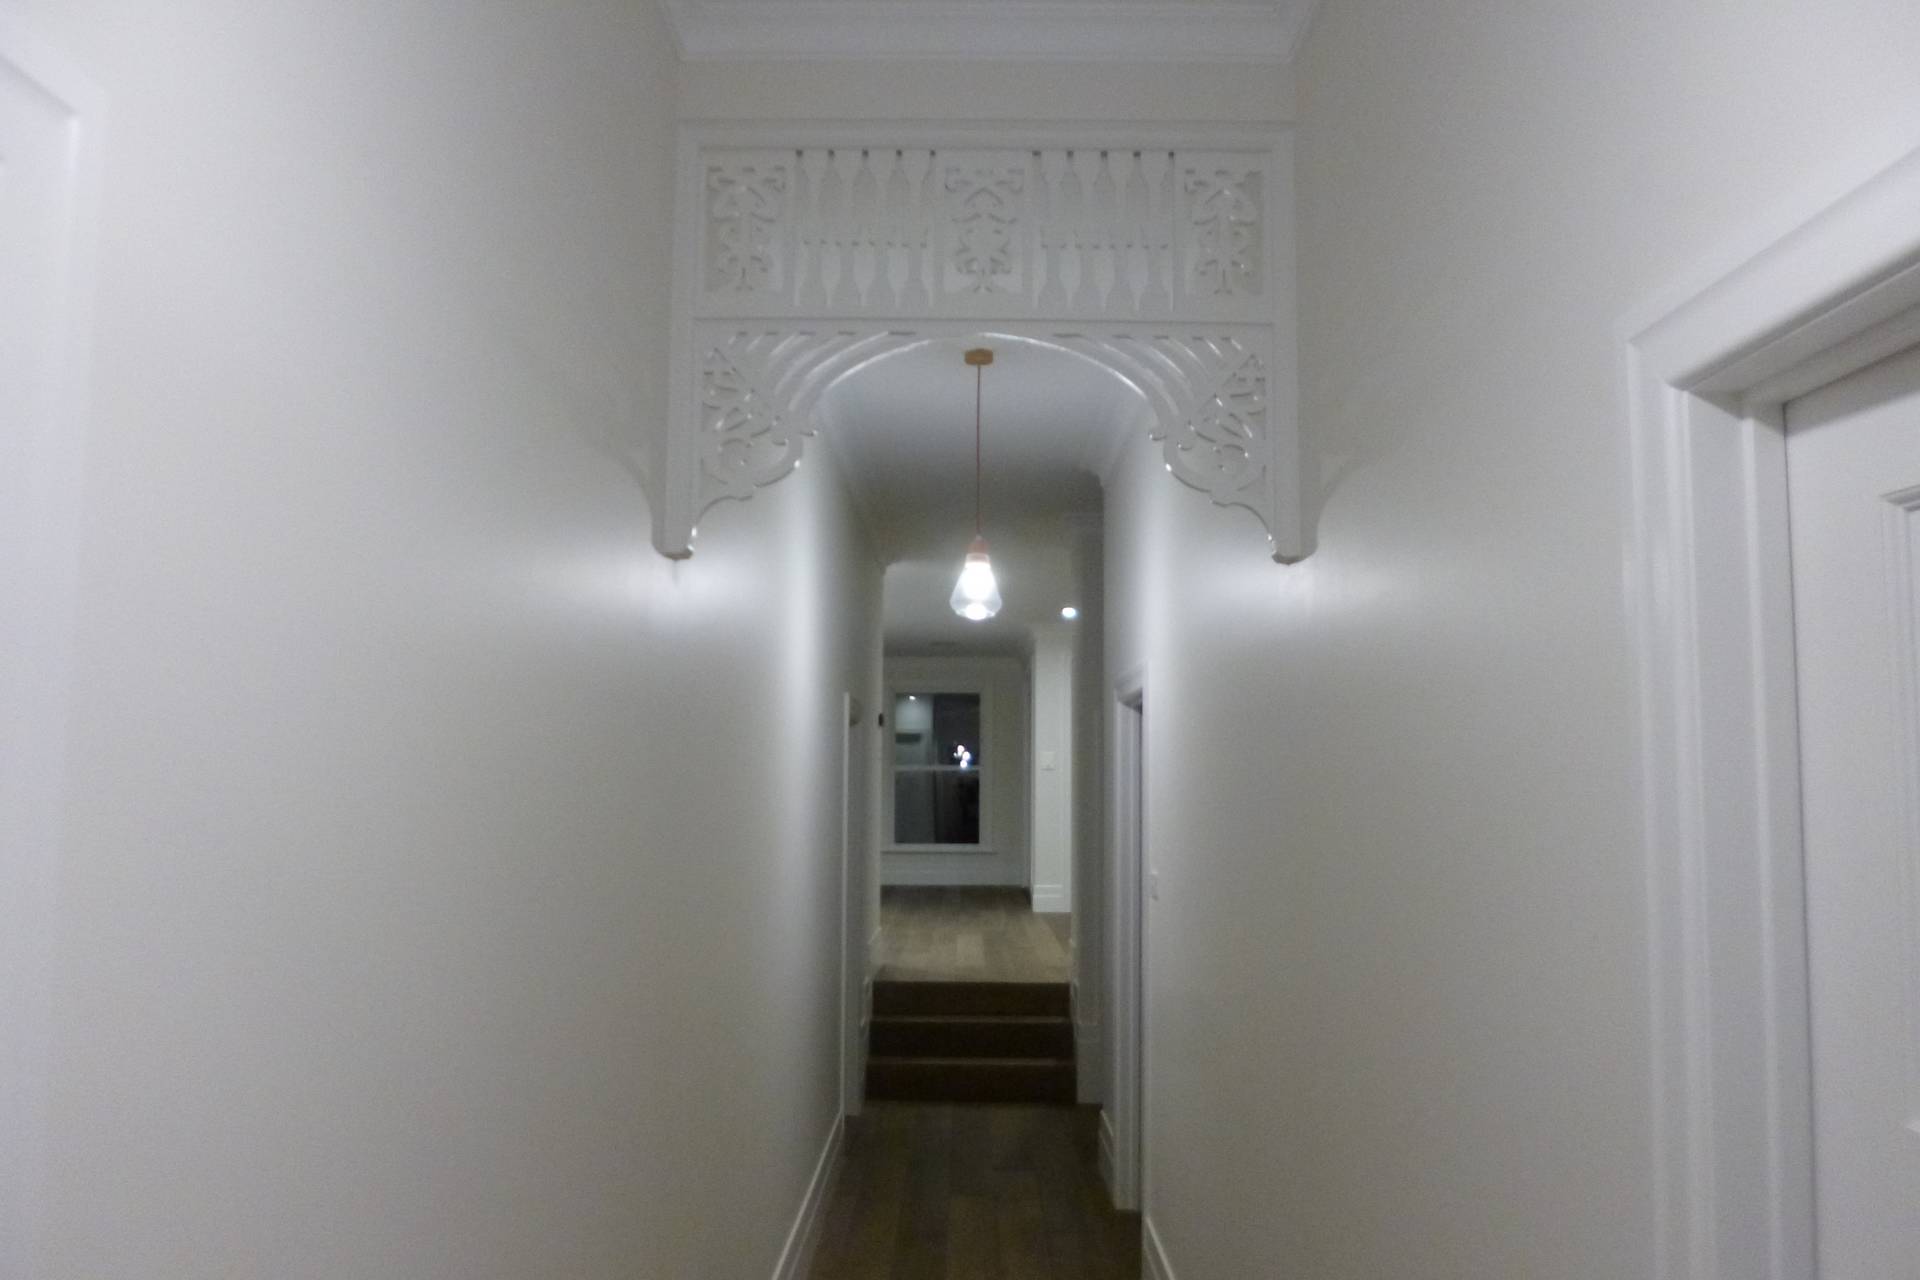 Timber fret work feature for the hallway